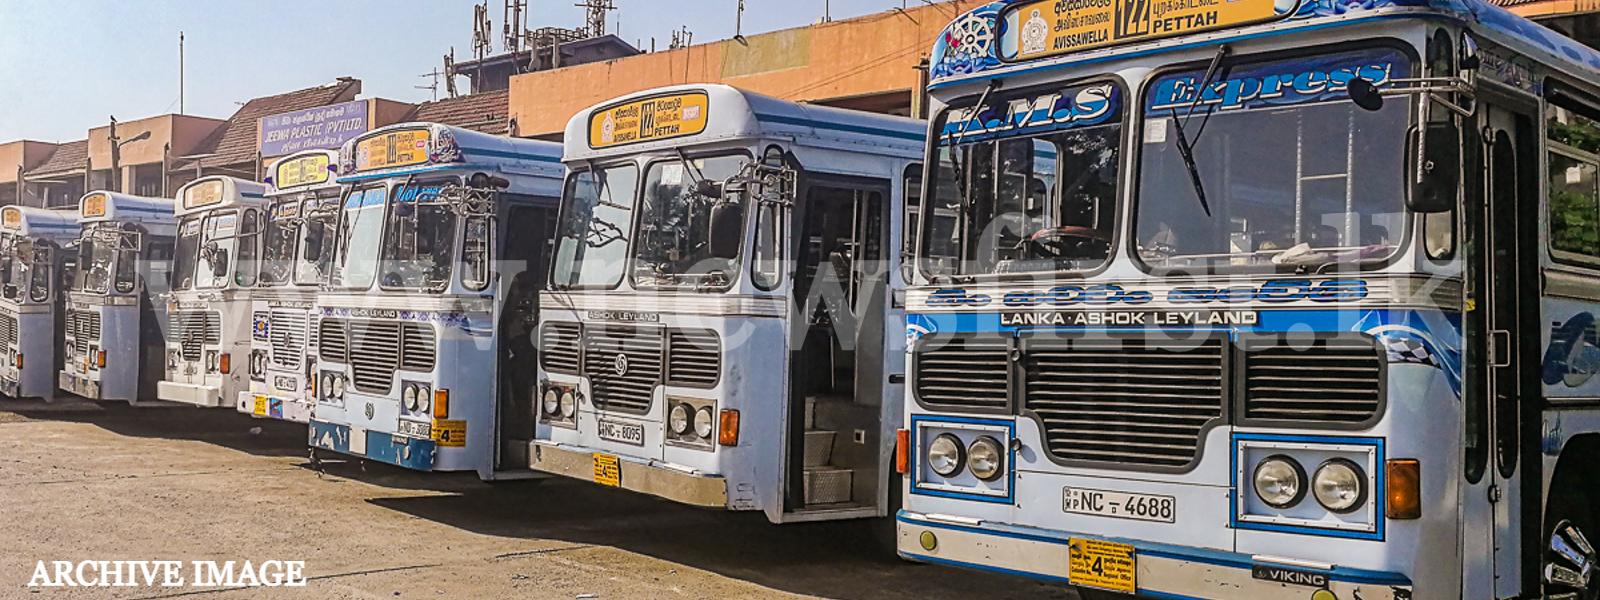 Revised bus fares in effect from Wednesday (05)